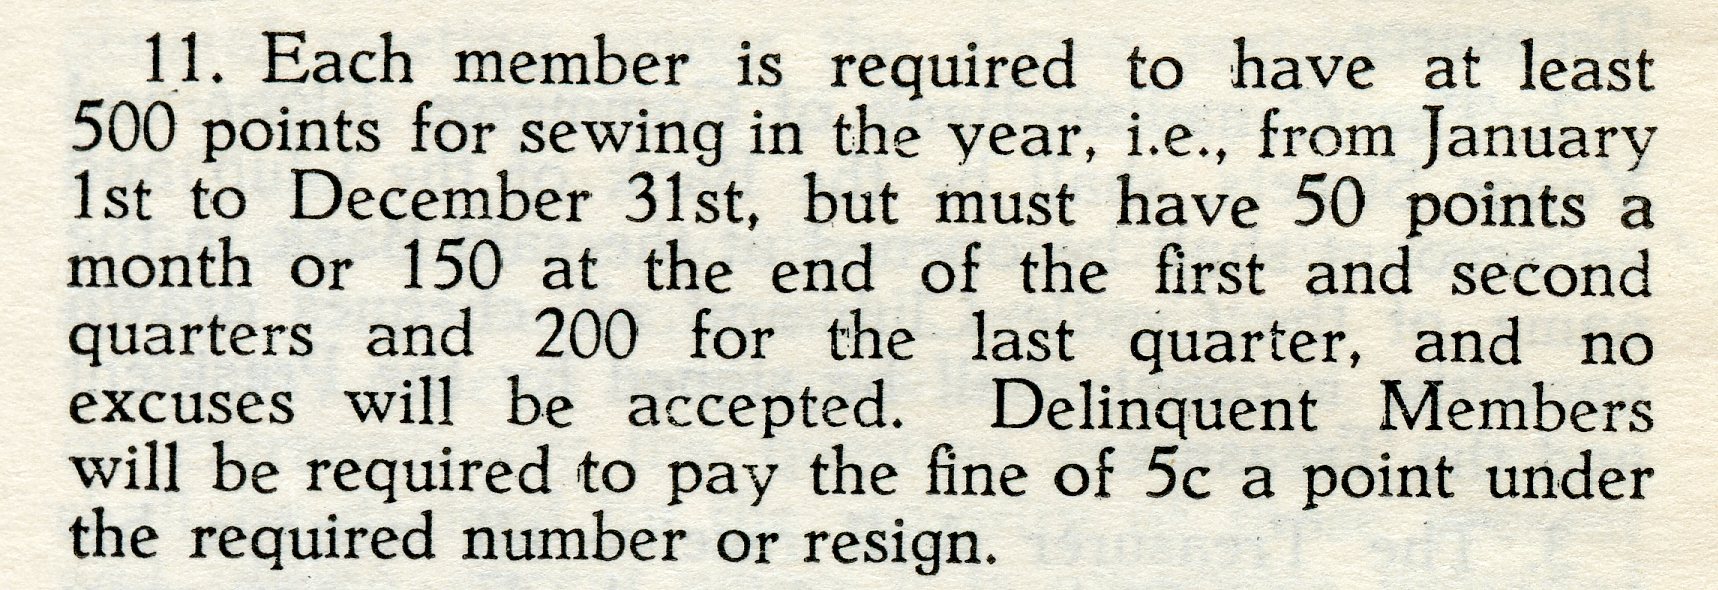 A clipping explaining that members needed at least 500 points for the year. Those who didn’t meet this had to pay 5 cents a point or resign from the club.